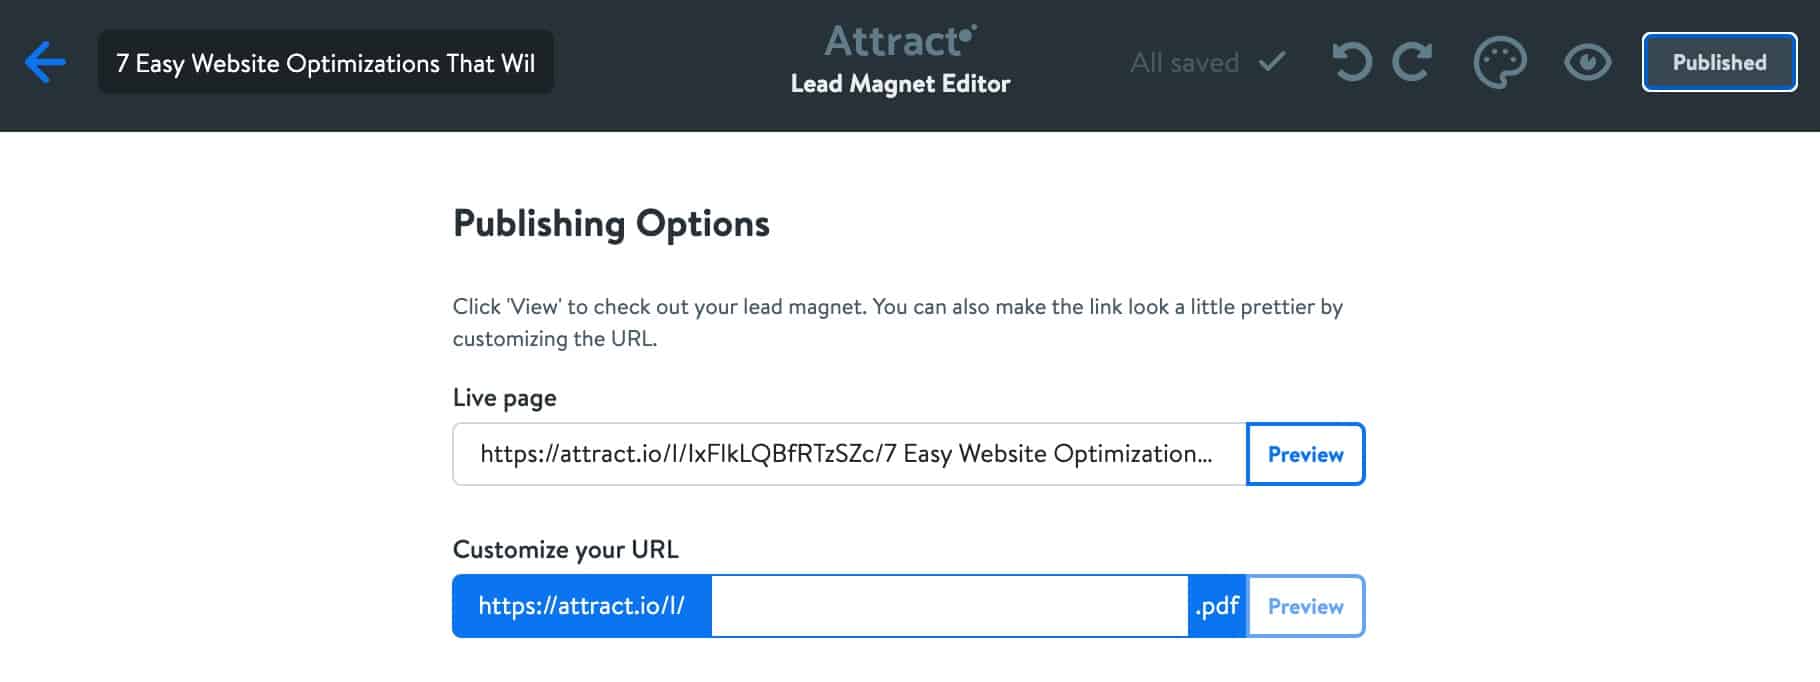 Attract Preview and Publish